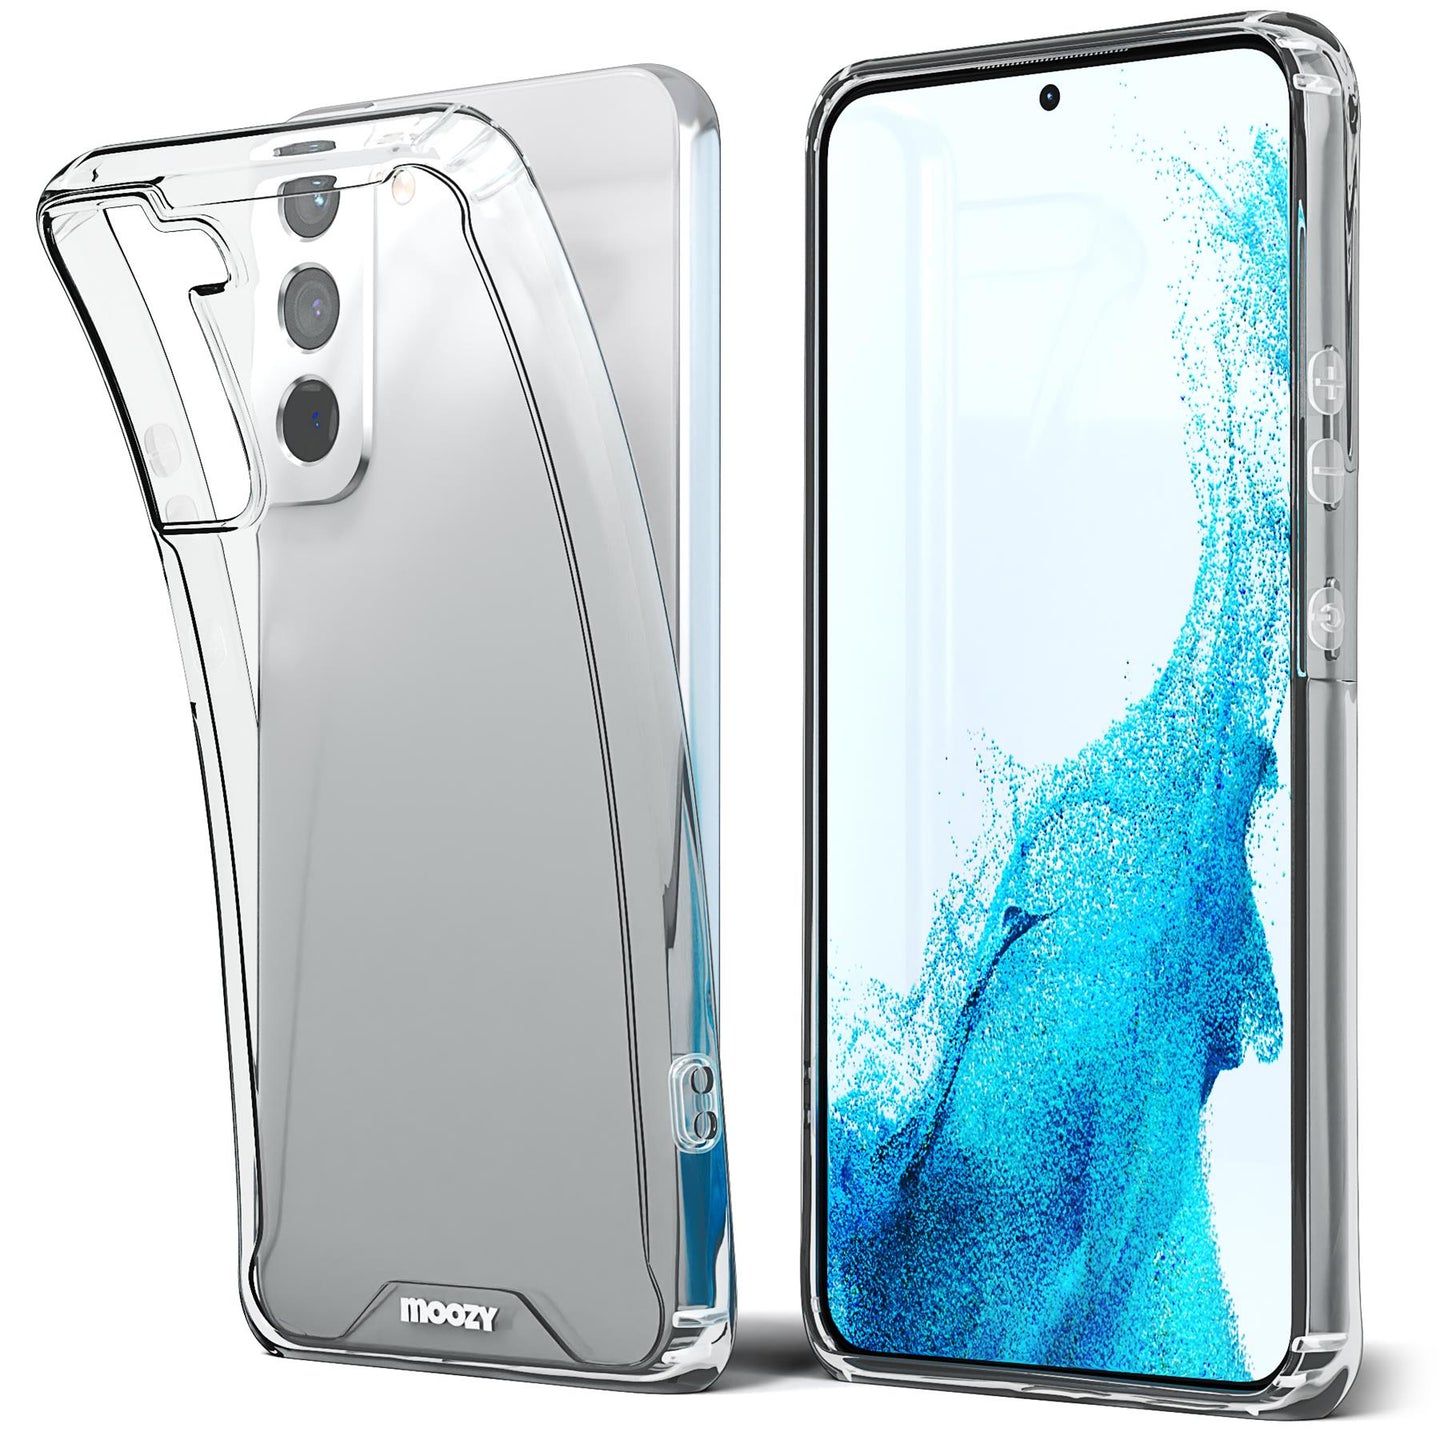 Moozy Xframe Shockproof Case for Samsung S22 - Transparent Rim Case, Double Colour Clear Hybrid Cover with Shock Absorbing TPU Rim